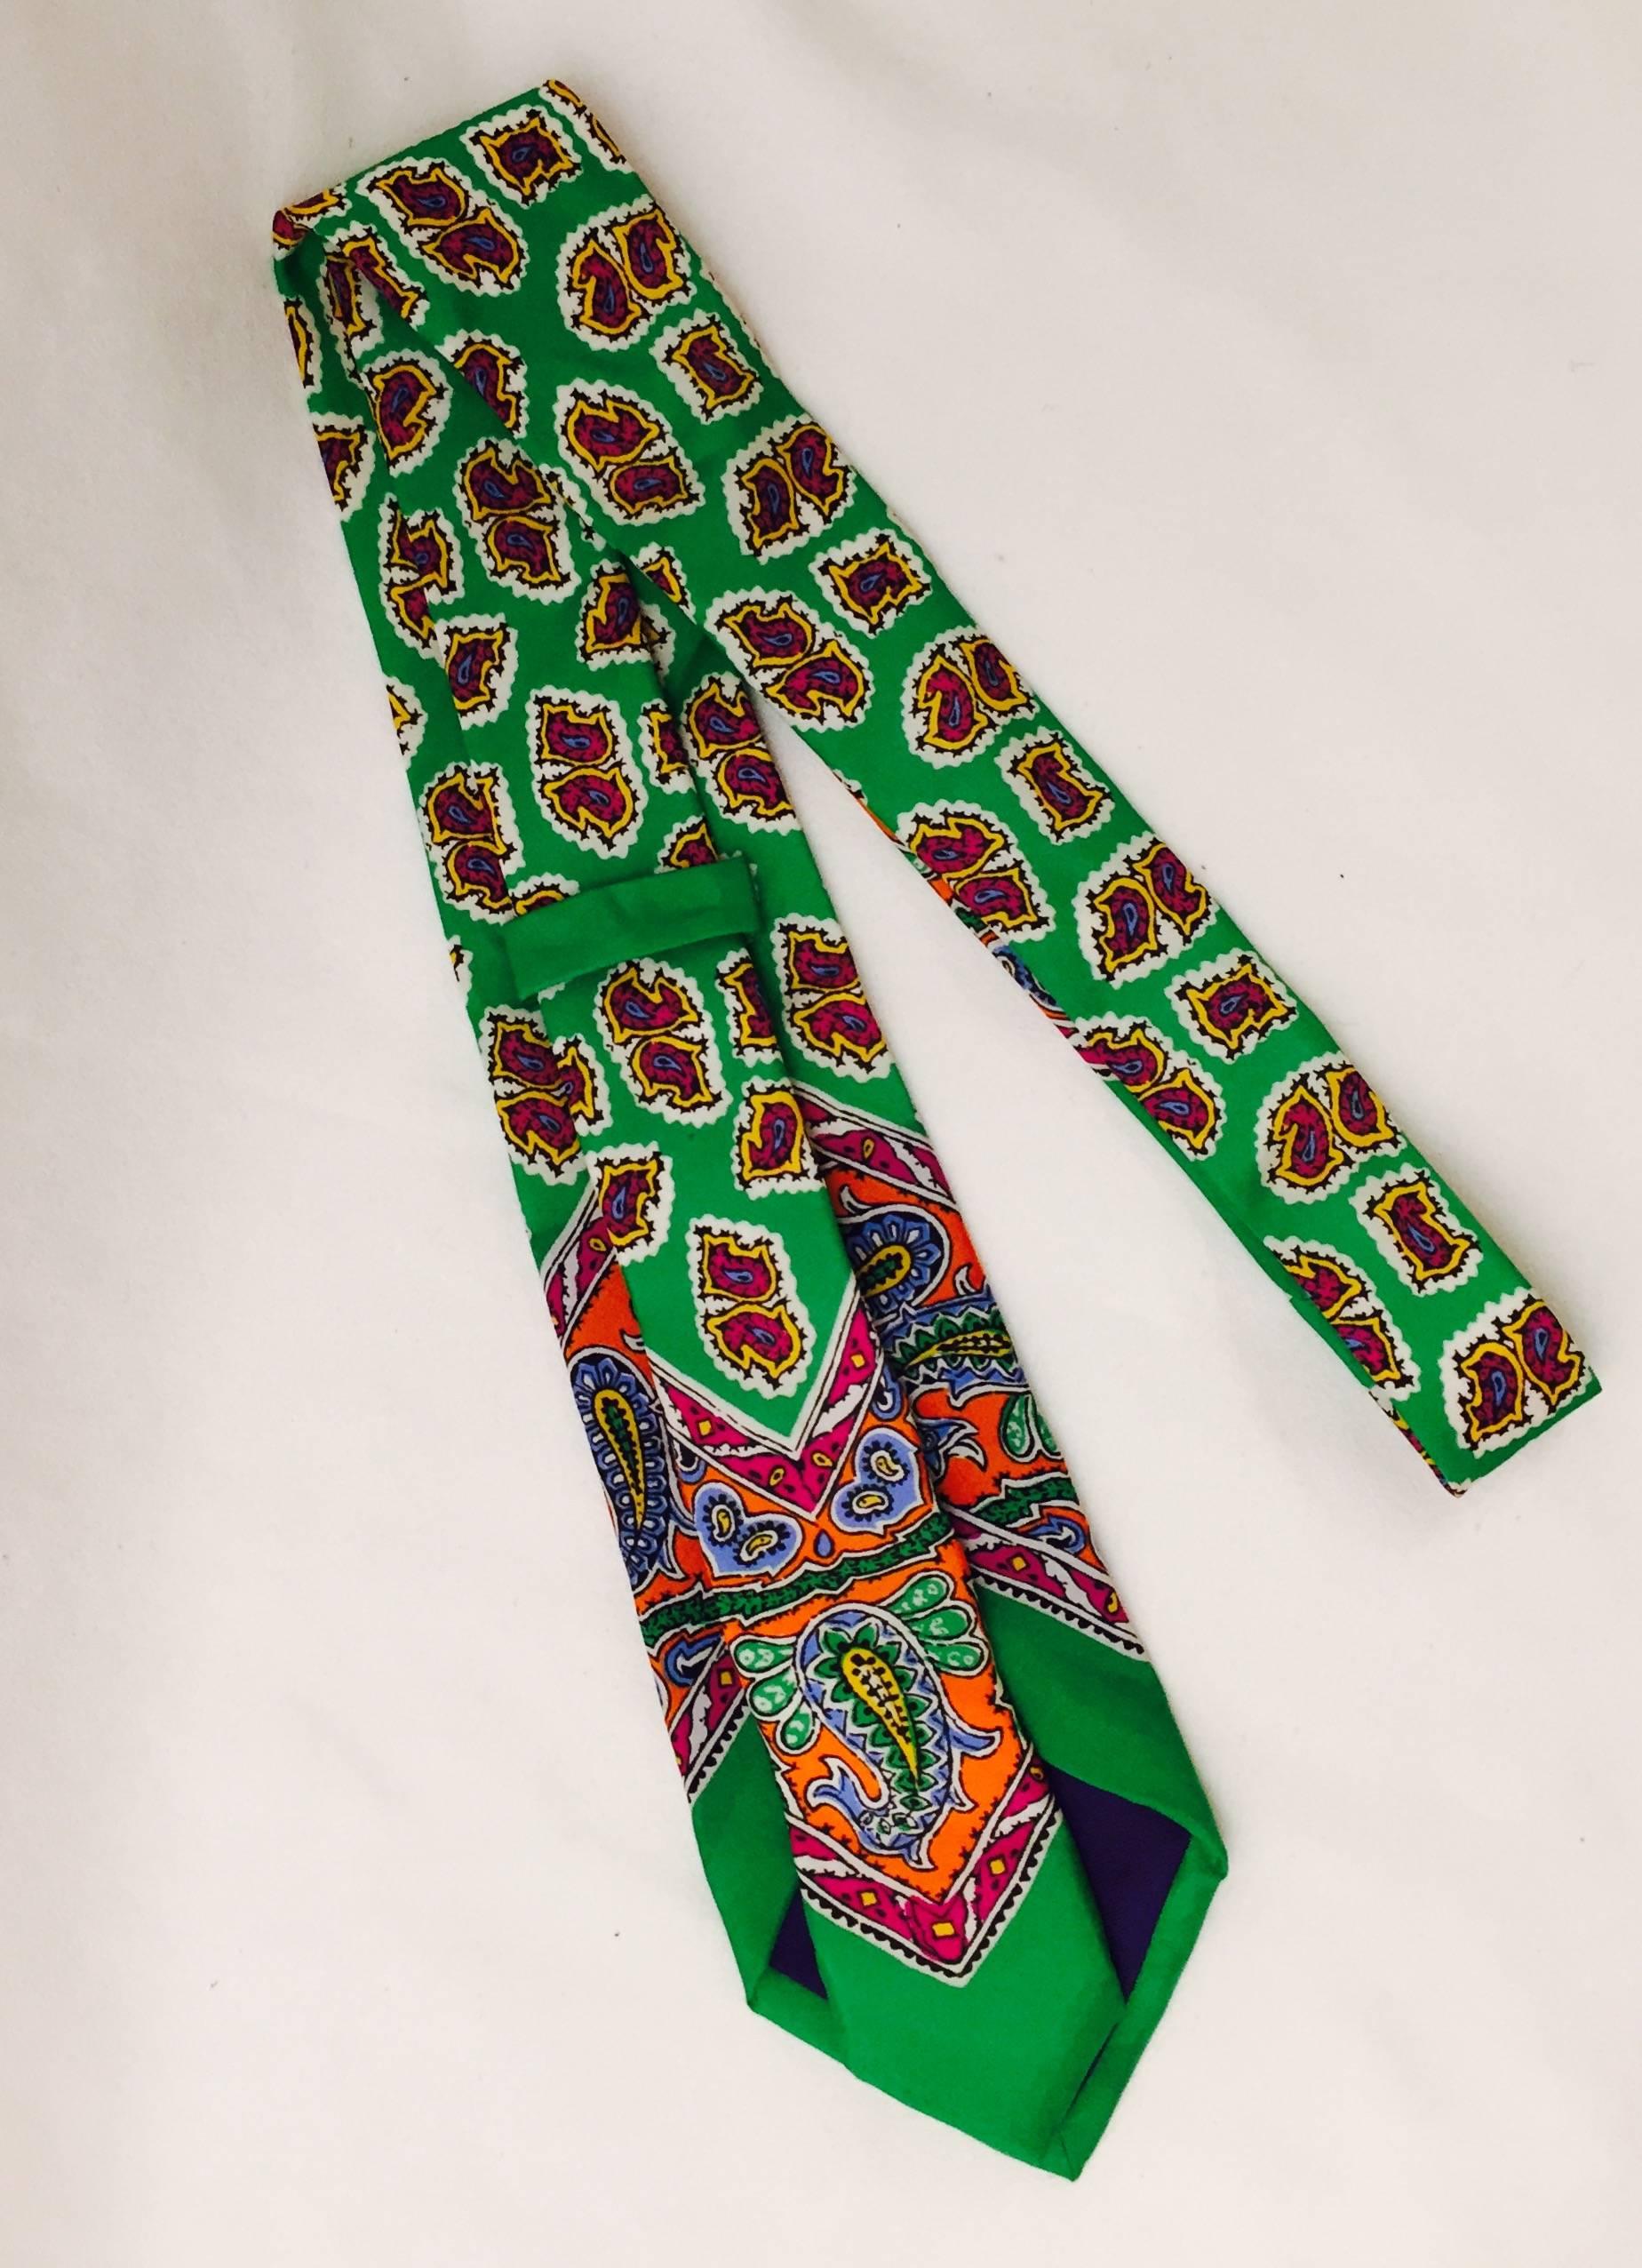 Wonderfully vibrant colours stand out in this tie and scarf set by Ralph Lauren Purple Label.  In paisley chartreuse with orange, blue, yellow  and cerise tones.  The tie is 58 inches long, and the scarf is 25 inches by 26 inches, 